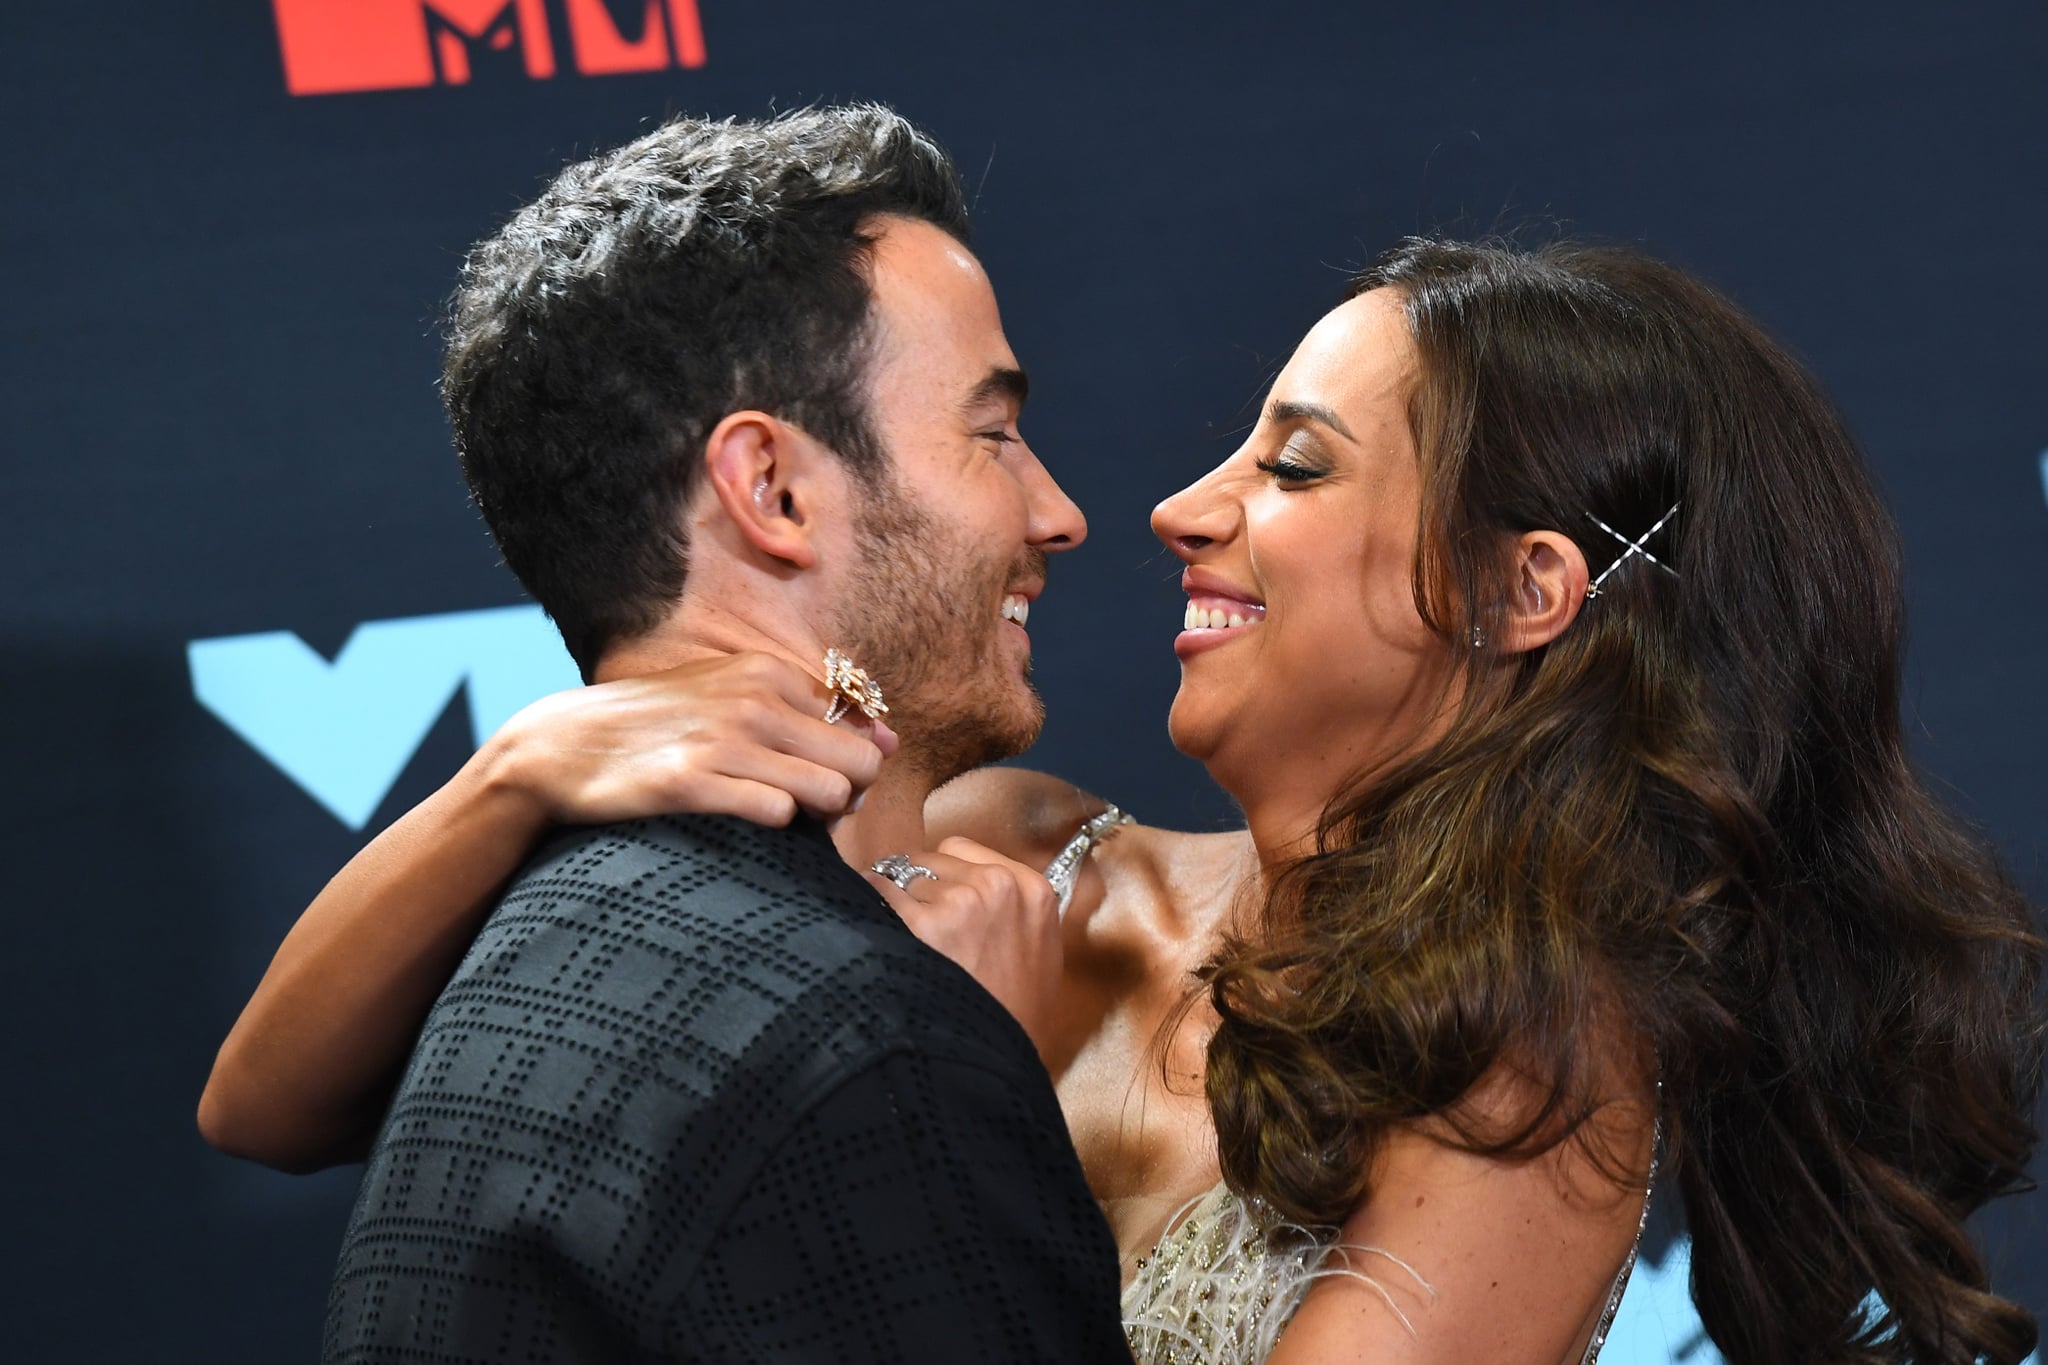 US musician Kevin Jonas (L) and wife Danielle Jonas pose in the press room during the 2019 MTV Video Music Awards at the Prudential Center in Newark, New Jersey on August 26, 2019. (Photo by Johannes EISELE / AFP)        (Photo credit should read JOHANNES EISELE/AFP via Getty Images)